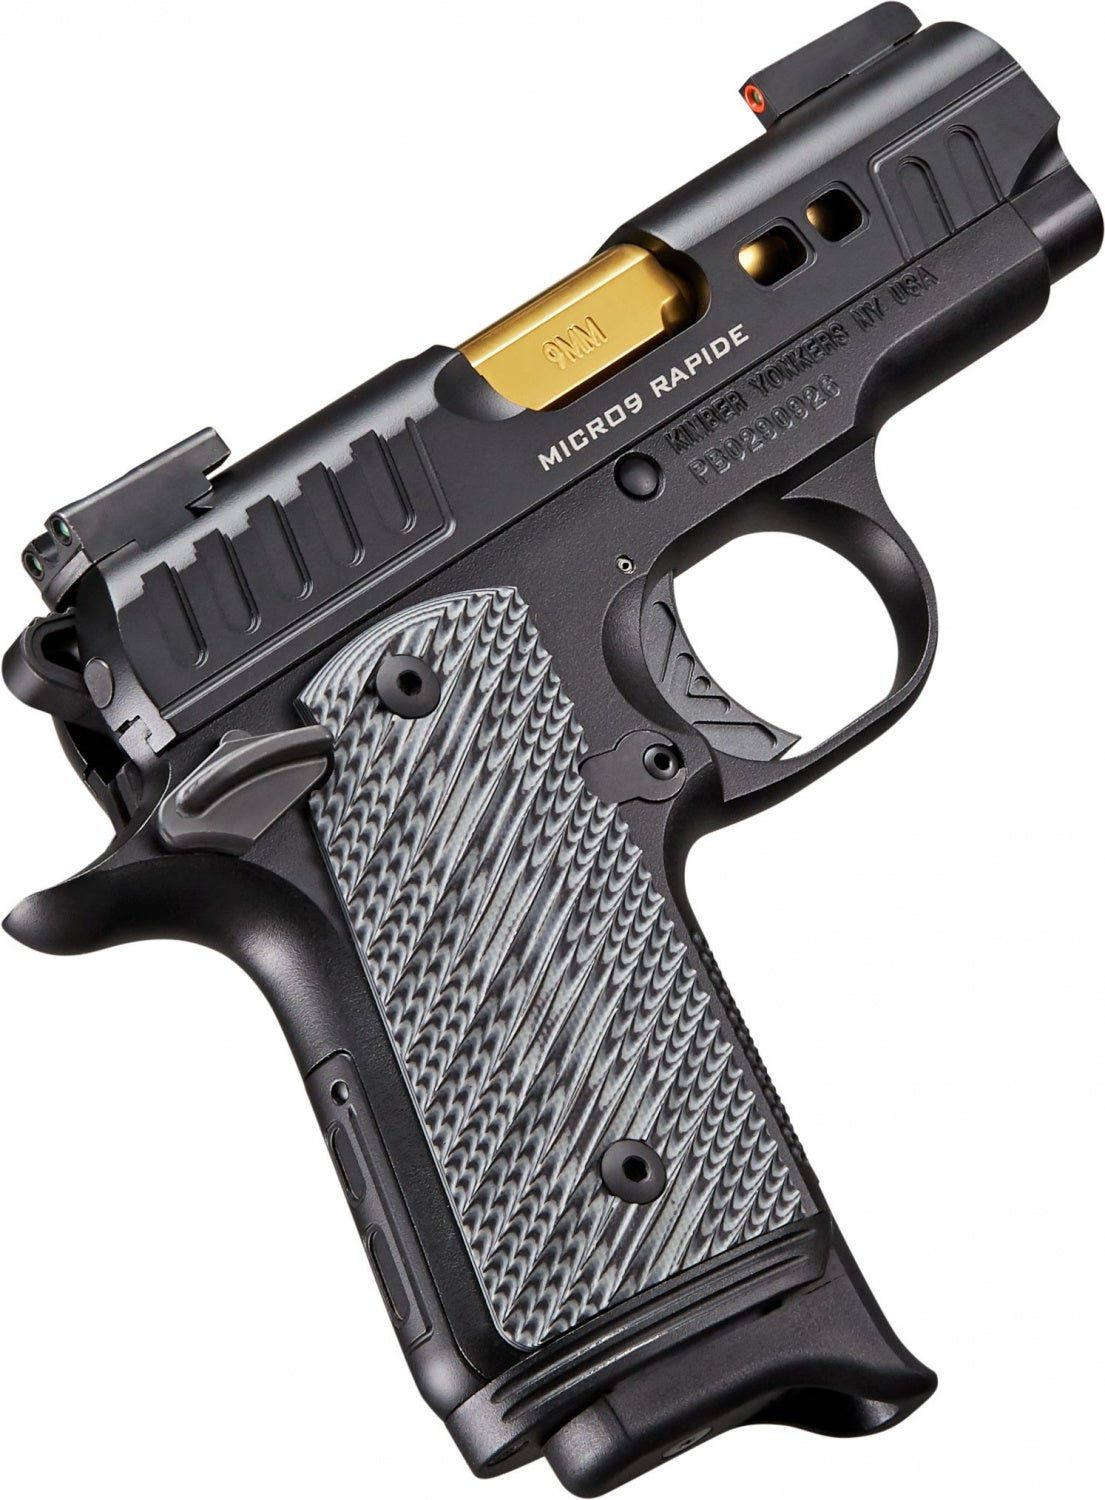 Kimber Adds Features to its Micro 9 Line-Up